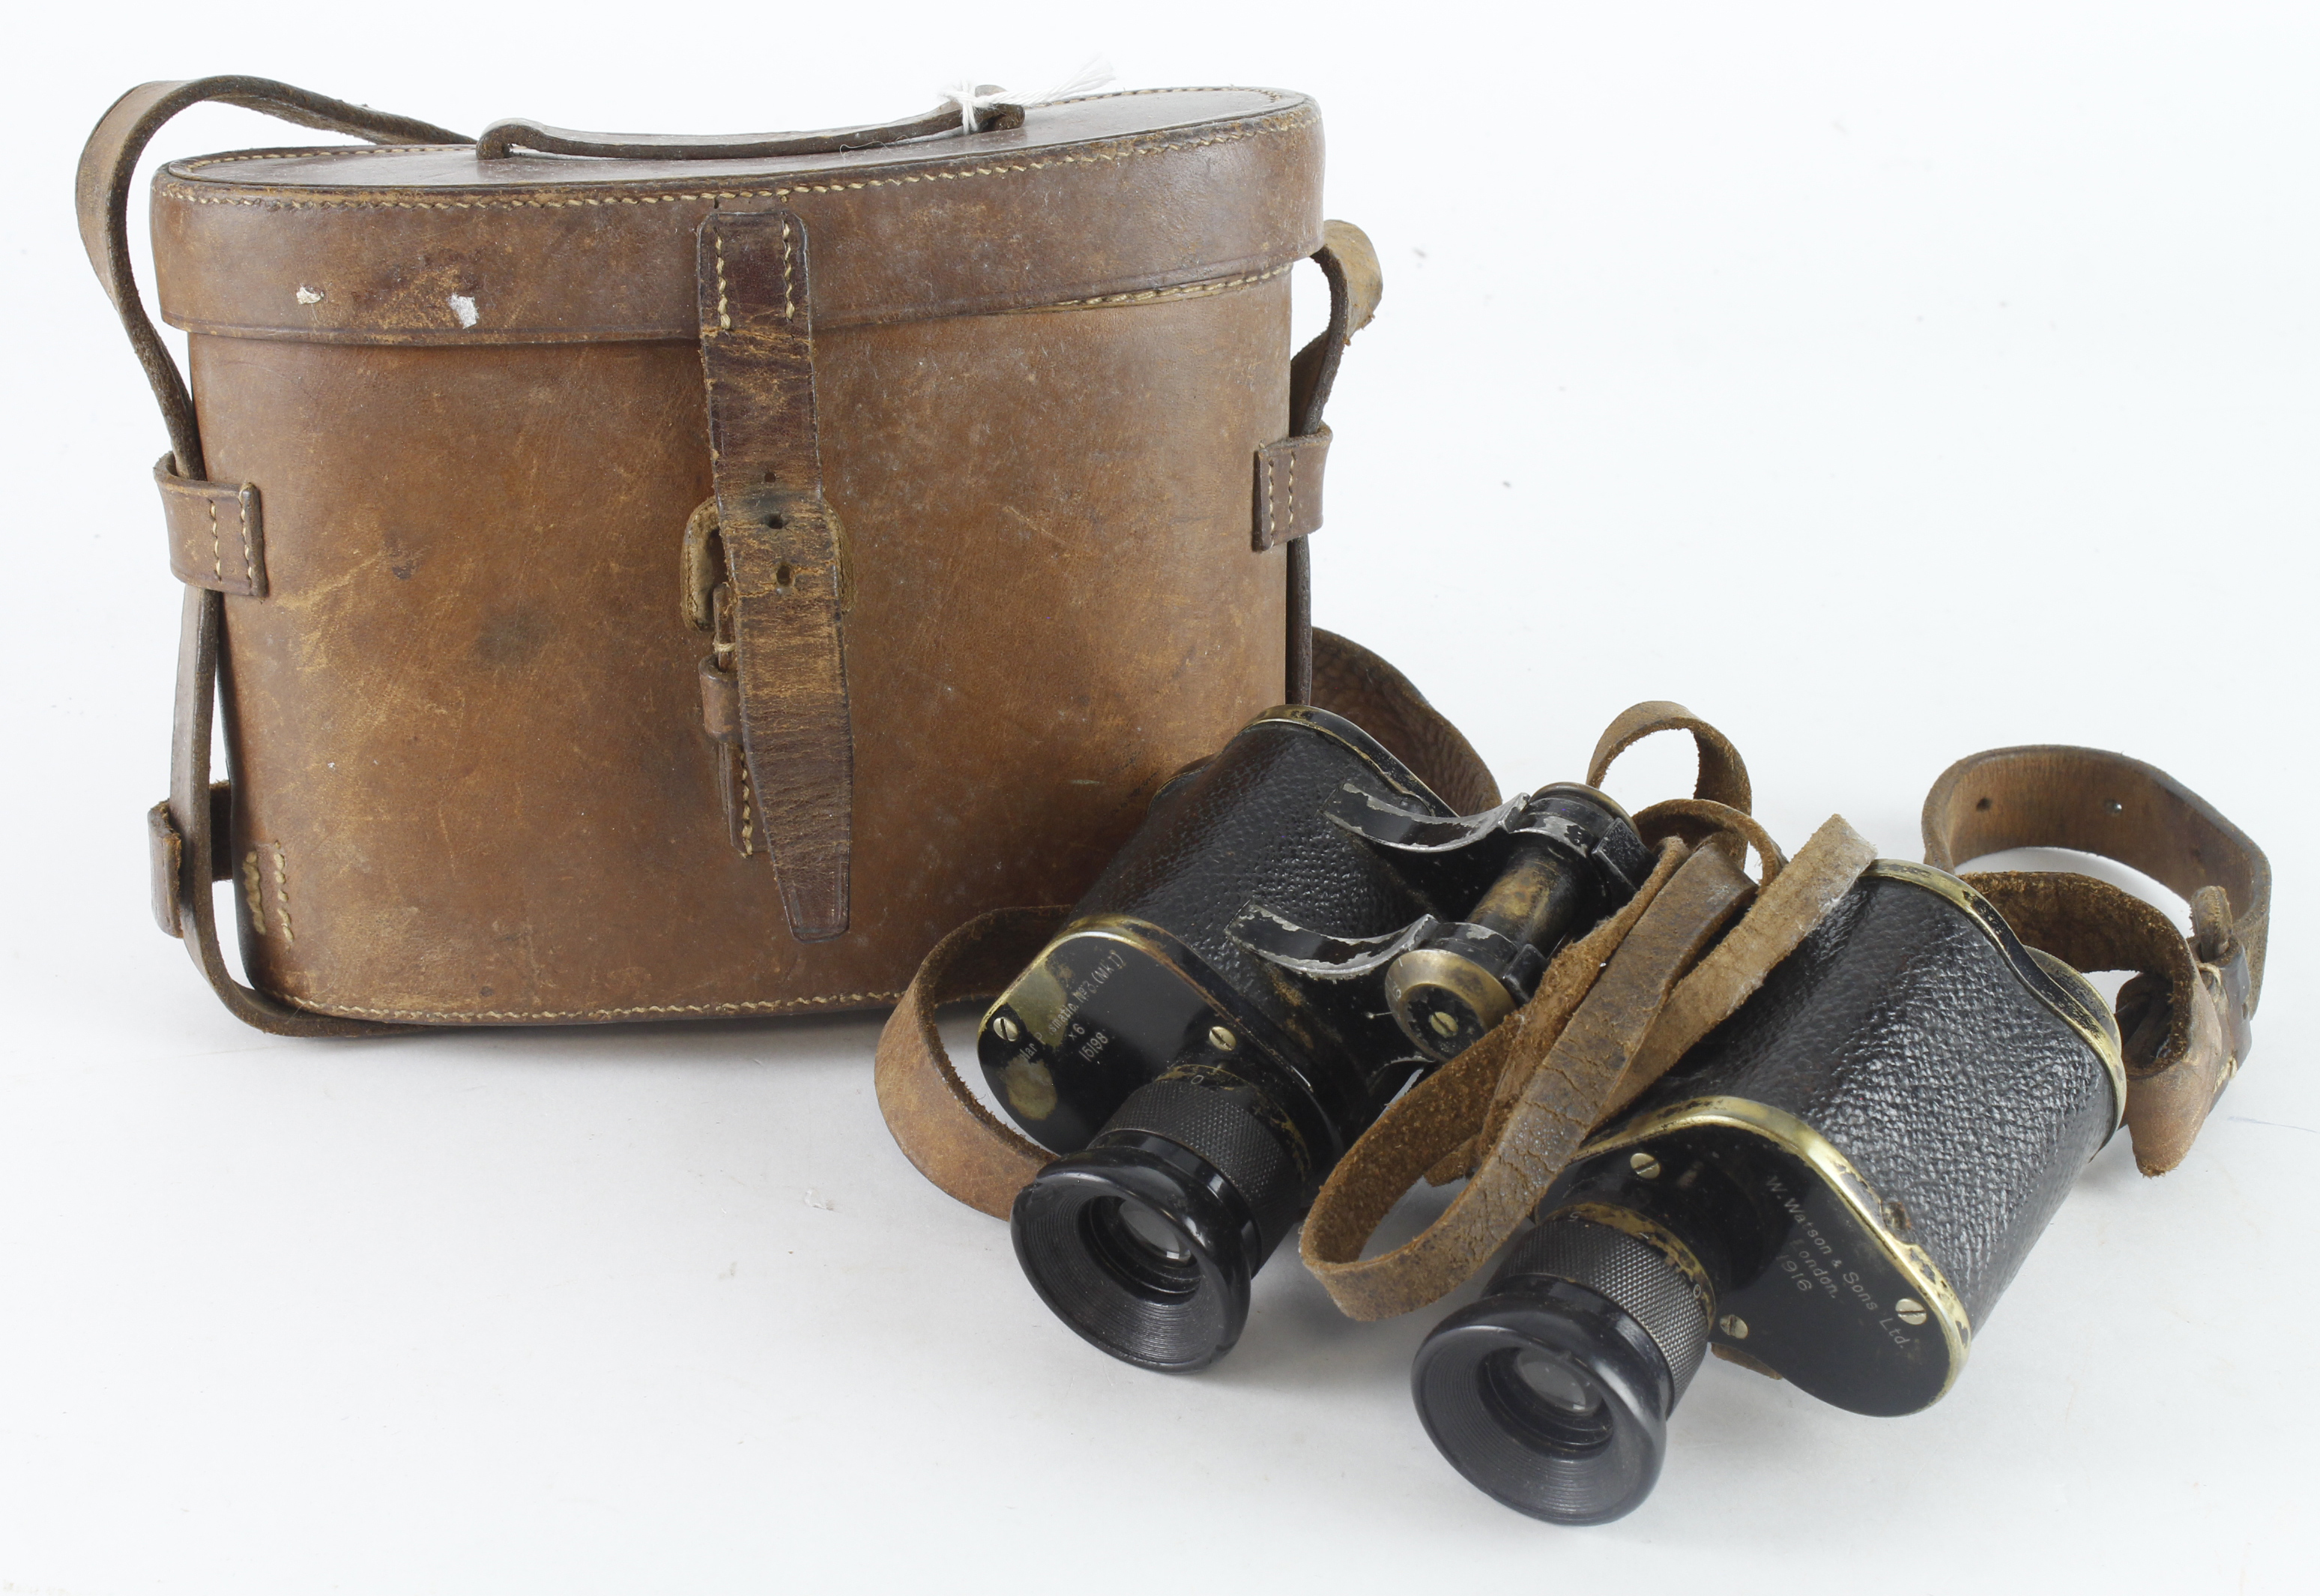 WW1 pair of 1916 dated binoculars made by W Watson of London in their brown leather case.